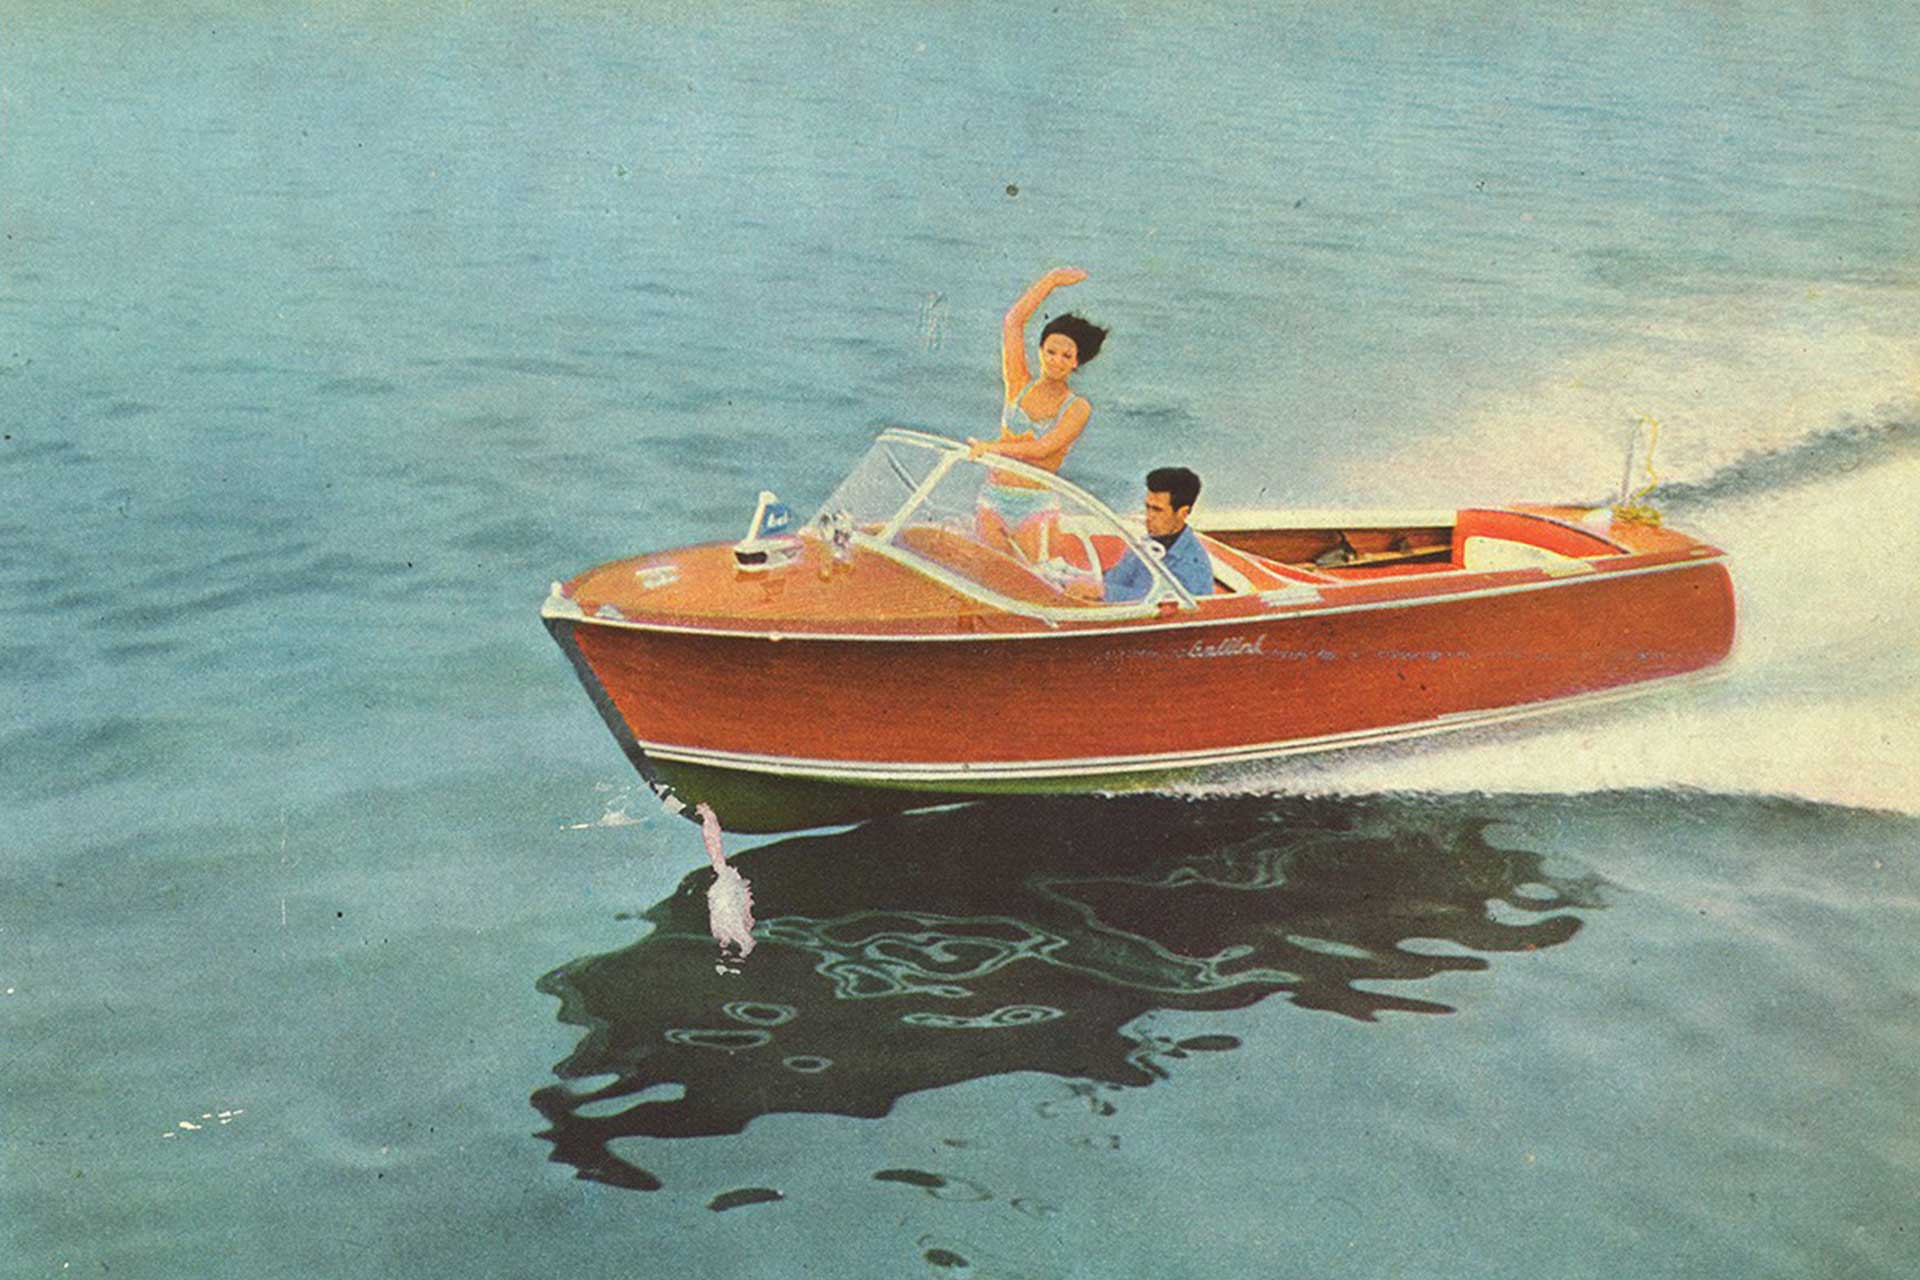 The Bellini 'Atlantic' motorboat in a representation of the 1960s